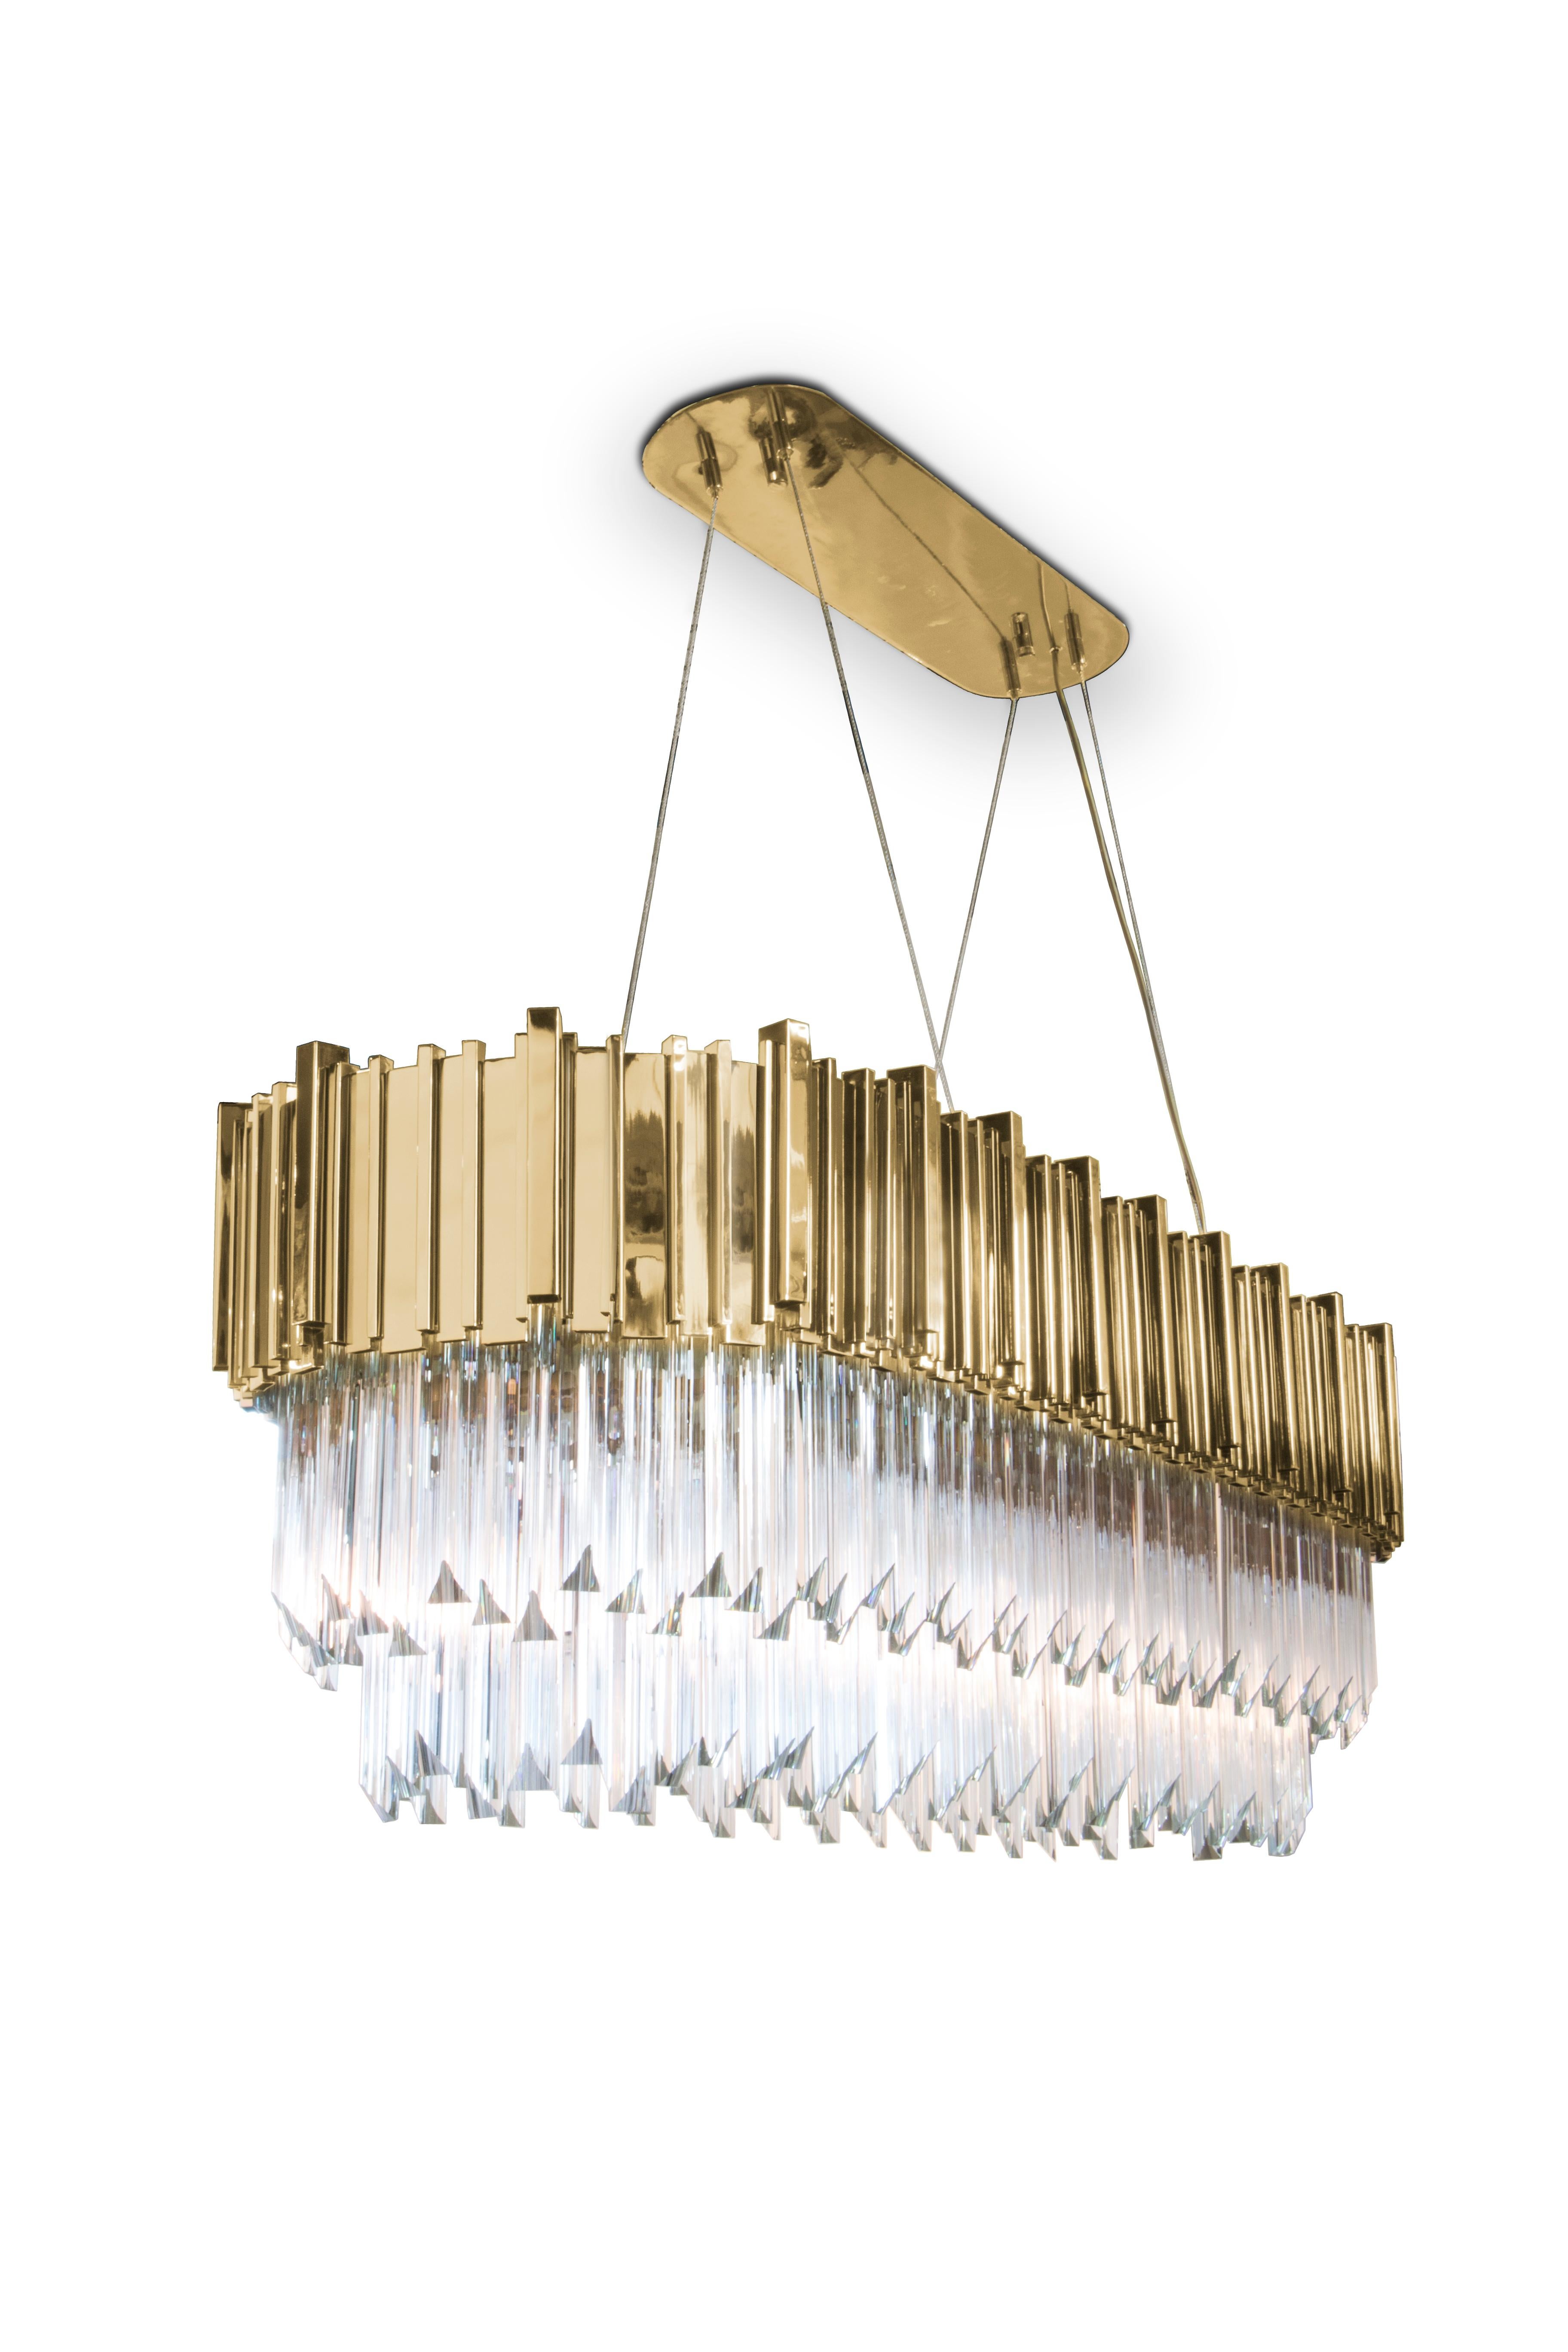 Created with crystal glass and brass, finished with gold plated, this magnificent suspension is capable of give a luxurious and glamorous look to any space. This product is a true jewelry for your decoration, creating a sophisticated and unique